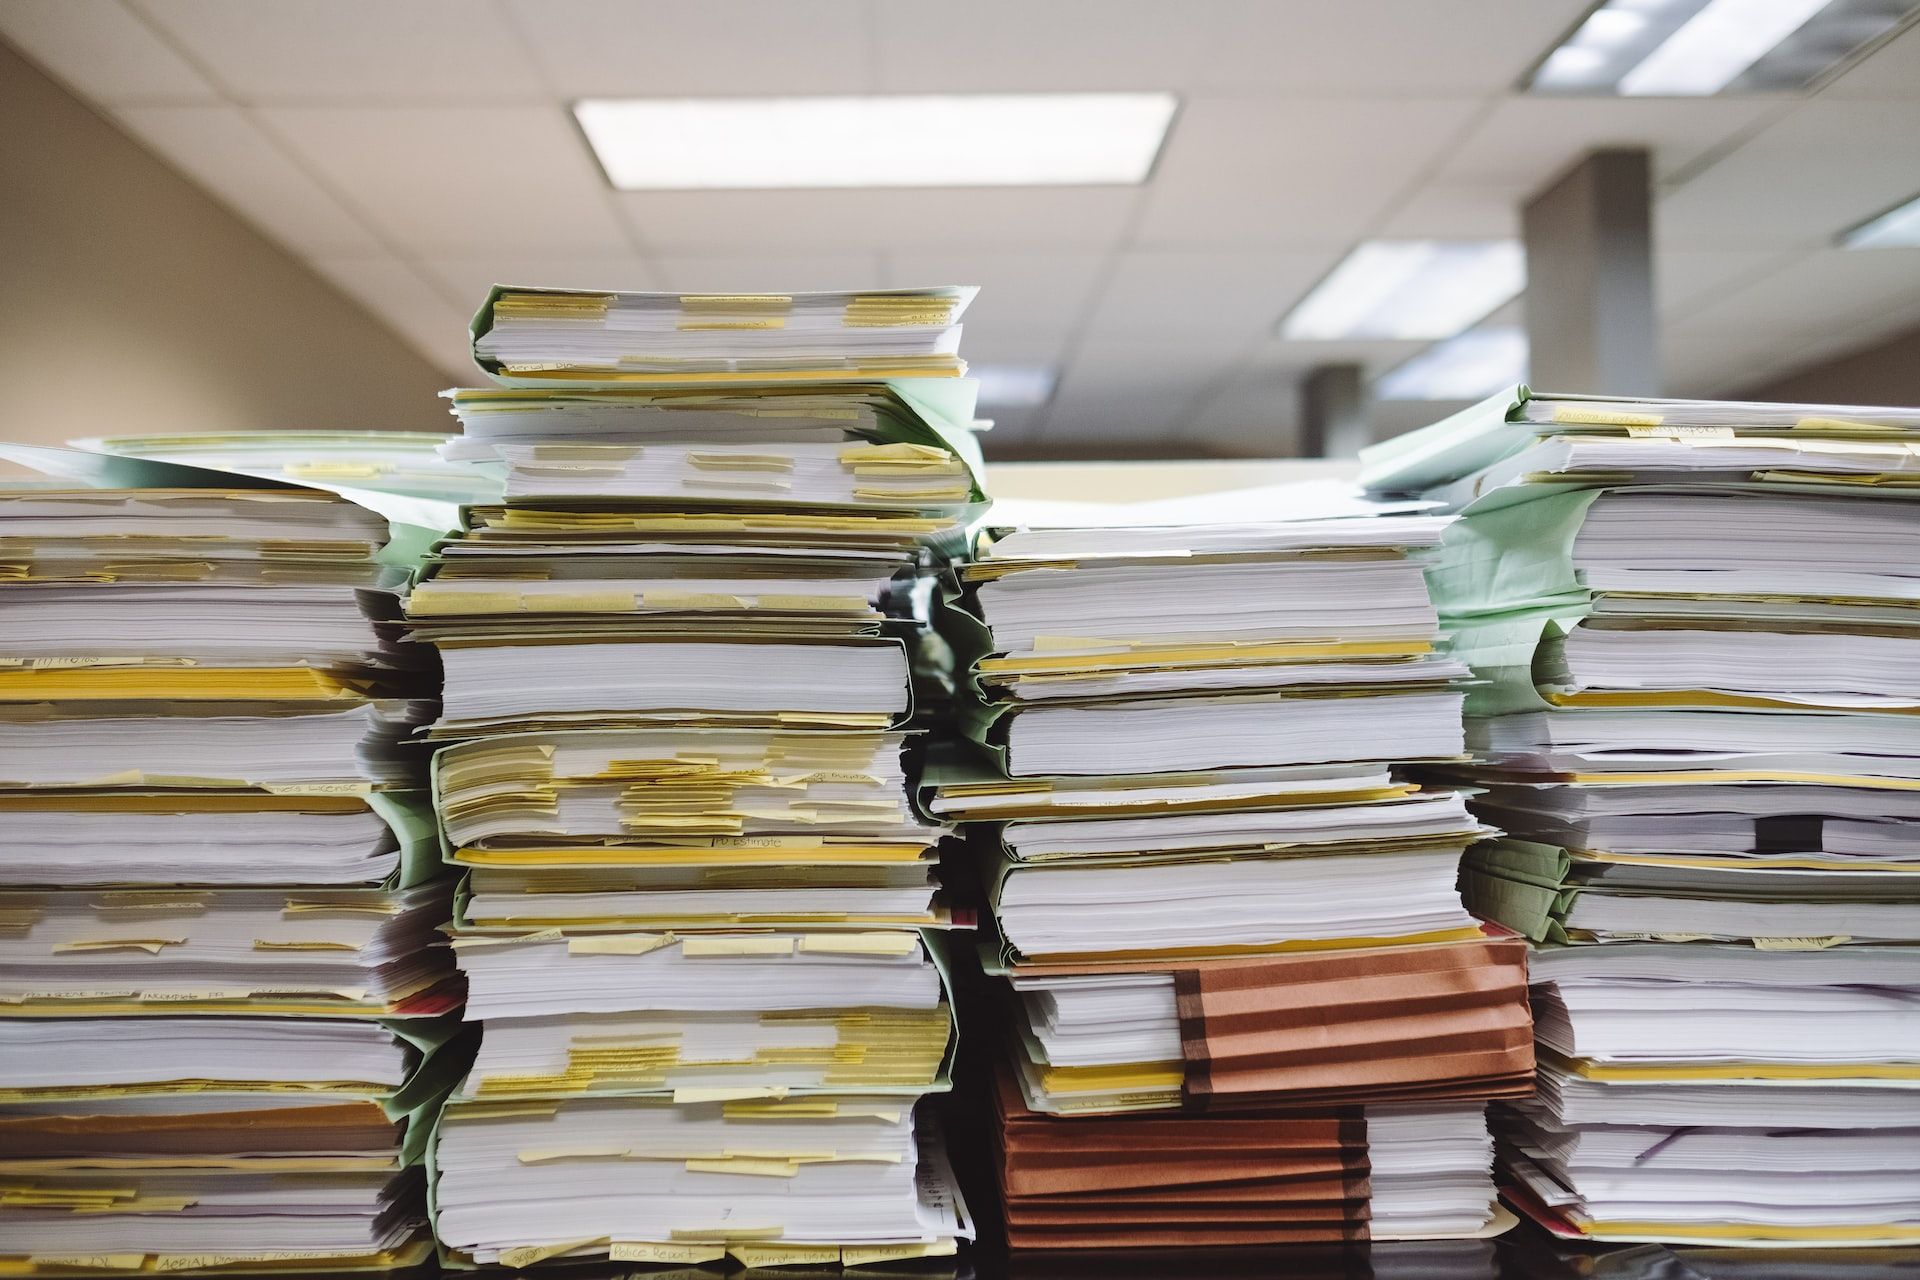 Piles of papers and files